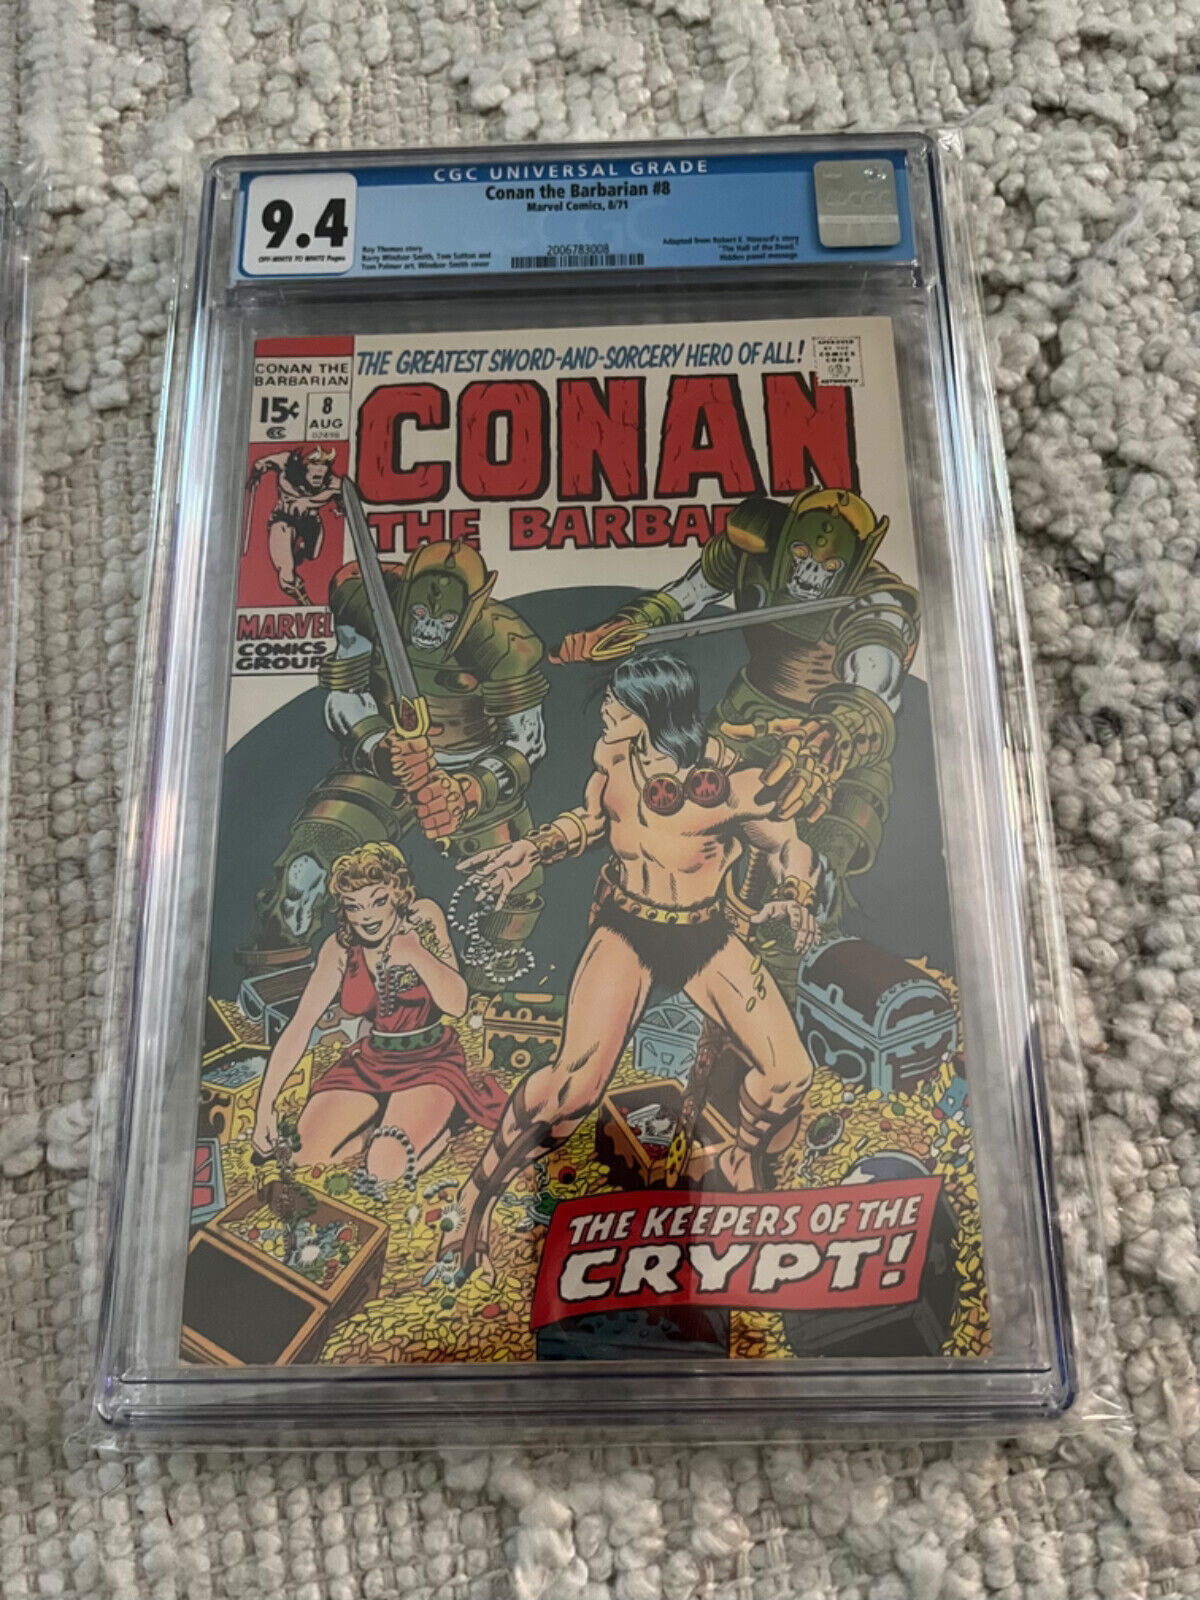 Conan the Barbarian #8: CGC 9.4 off-white to white pages, mylar sleeve